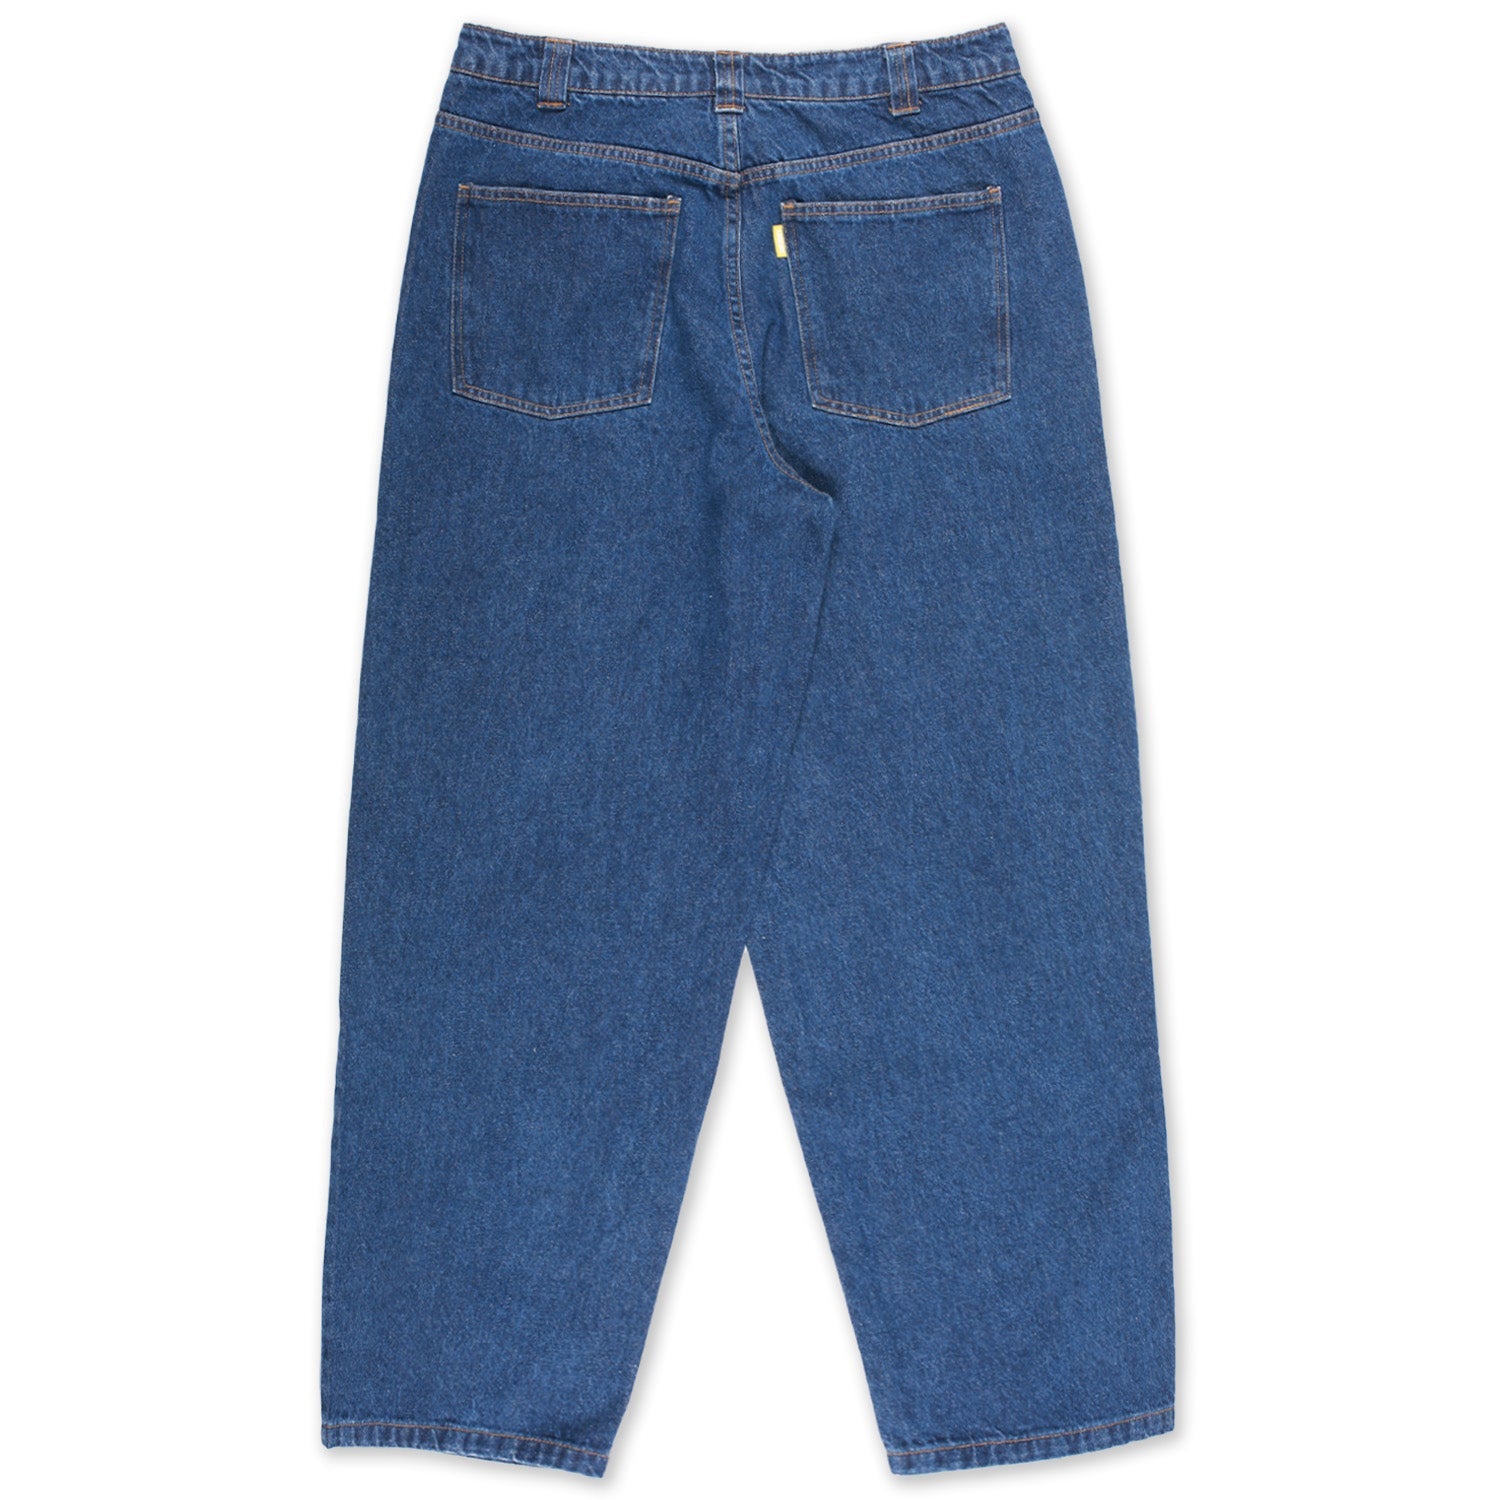 Washed Blue Theories Brand Plaza Jeans Back